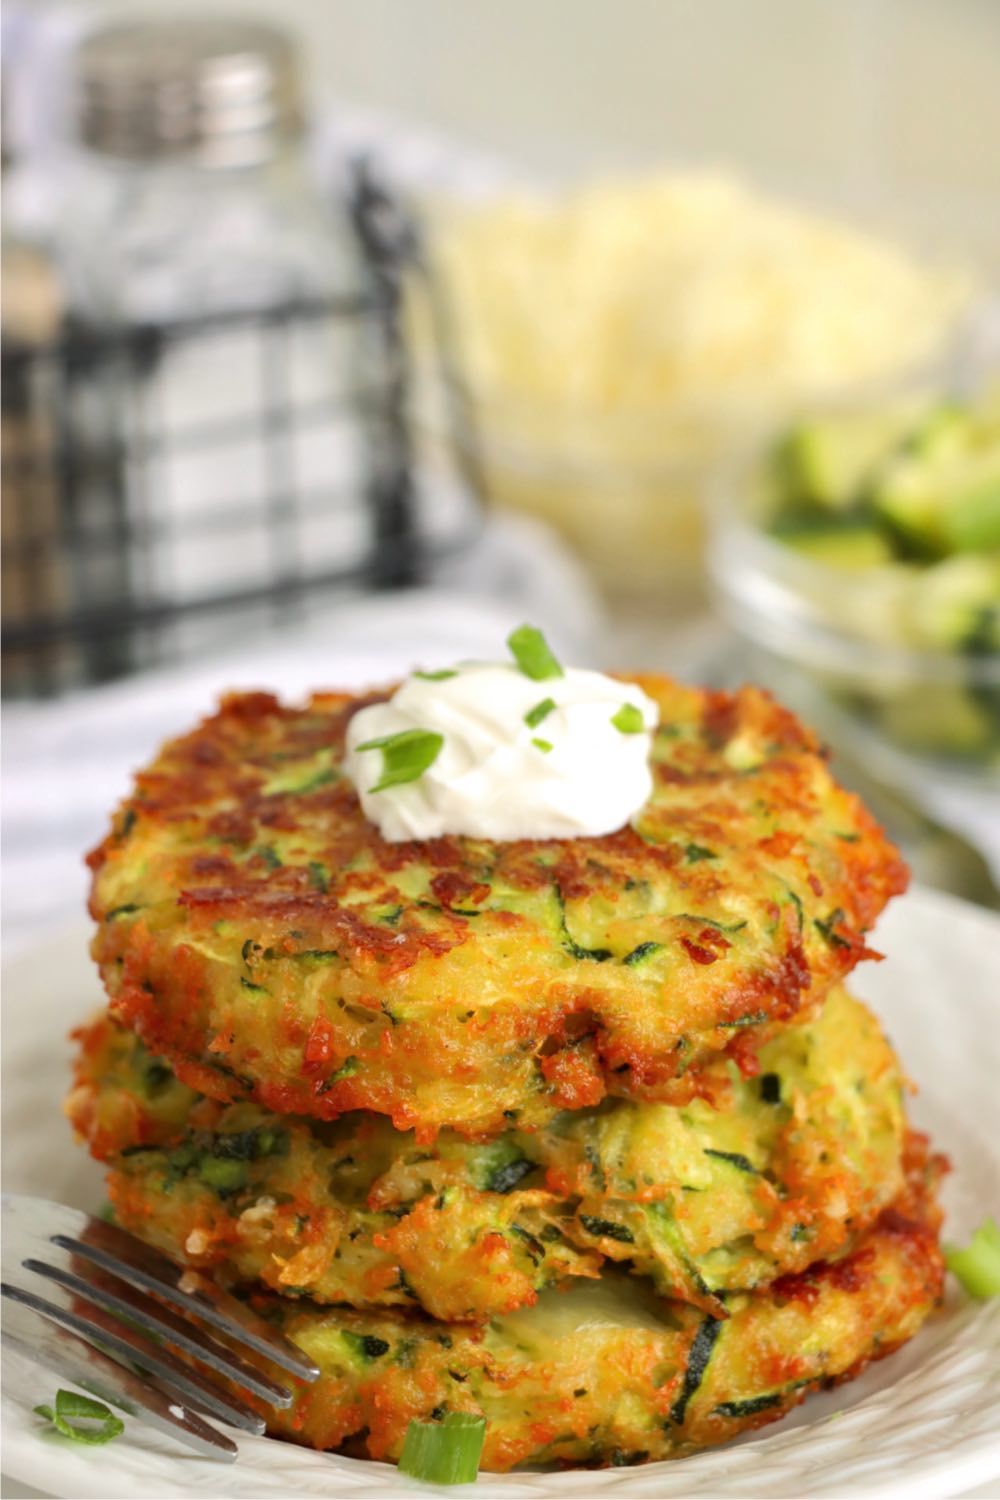 stack of fried zucchini patties with sour cream dollop on top